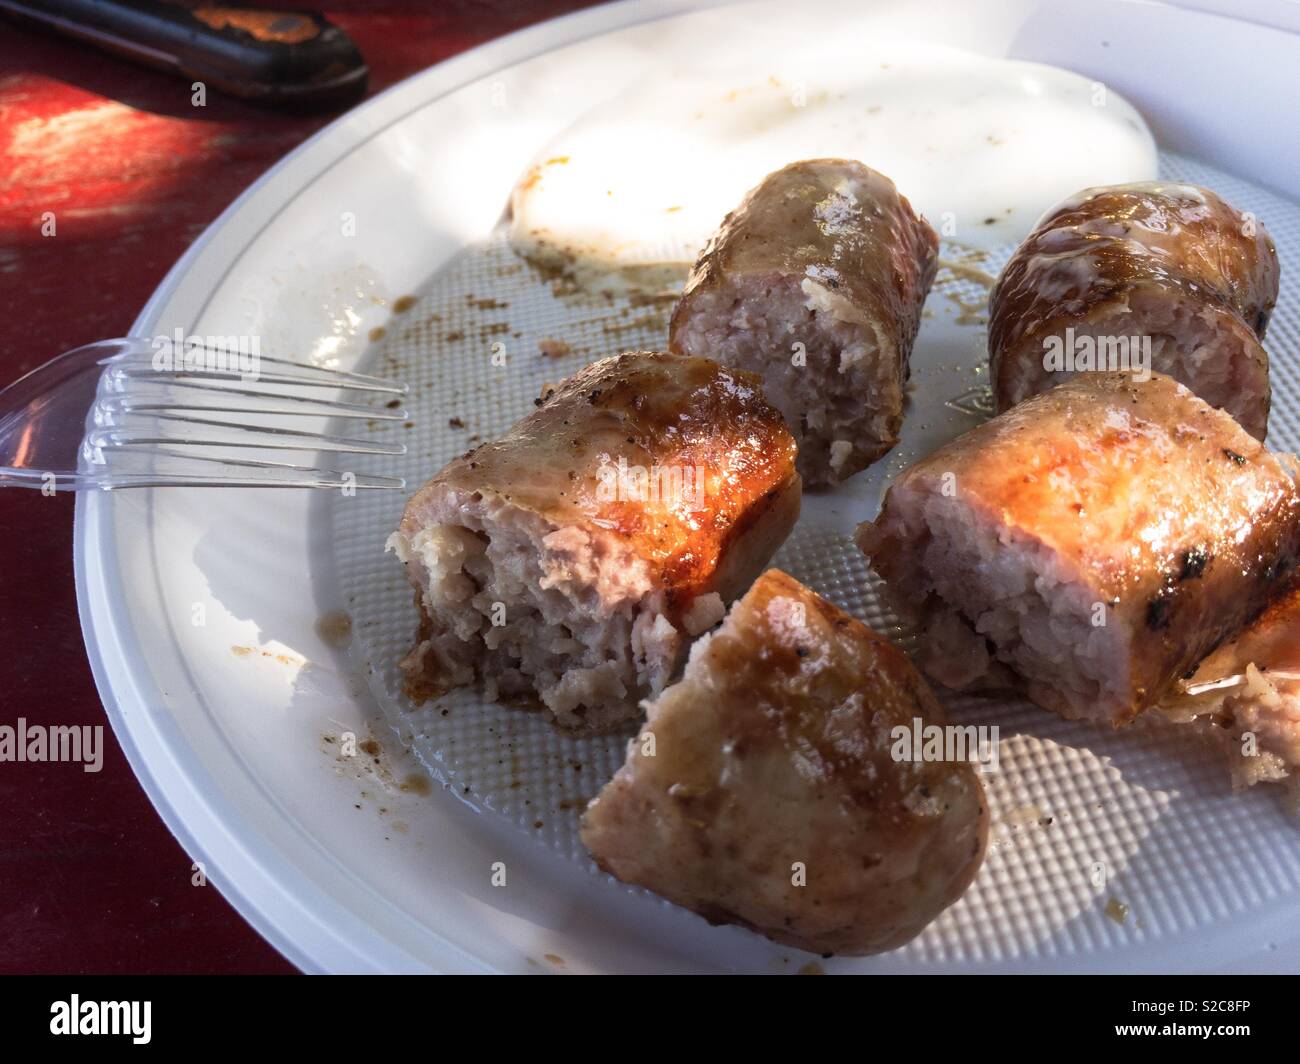 Grilled sausages in a disposable plate, Ukraine Stock Photo